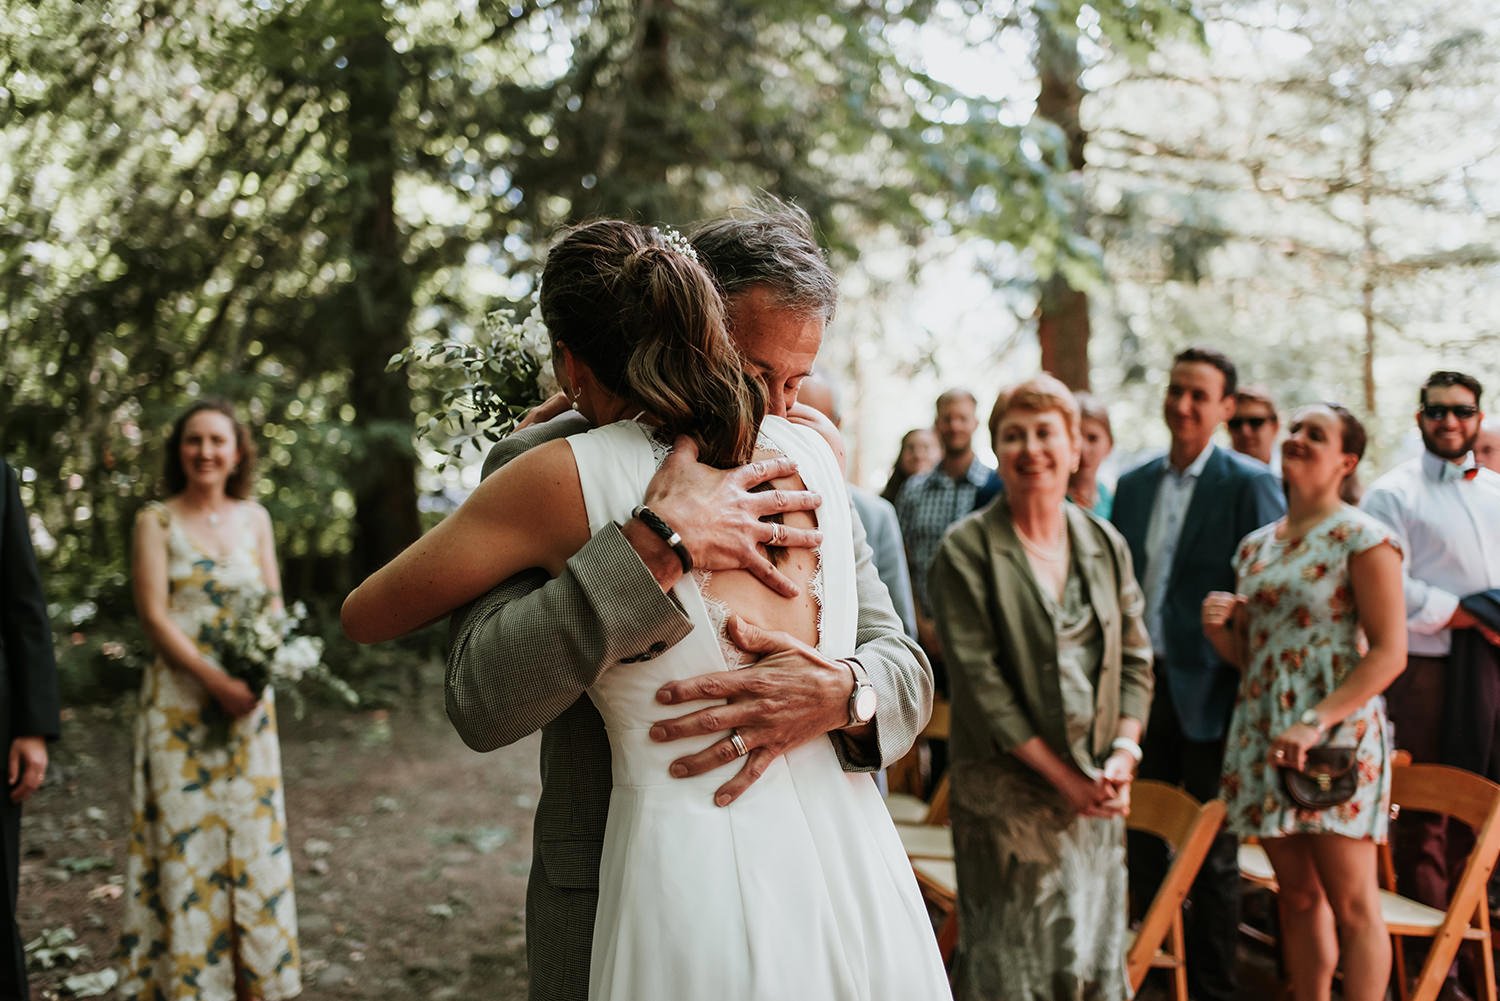 Squamish wedding ceremony in the forest